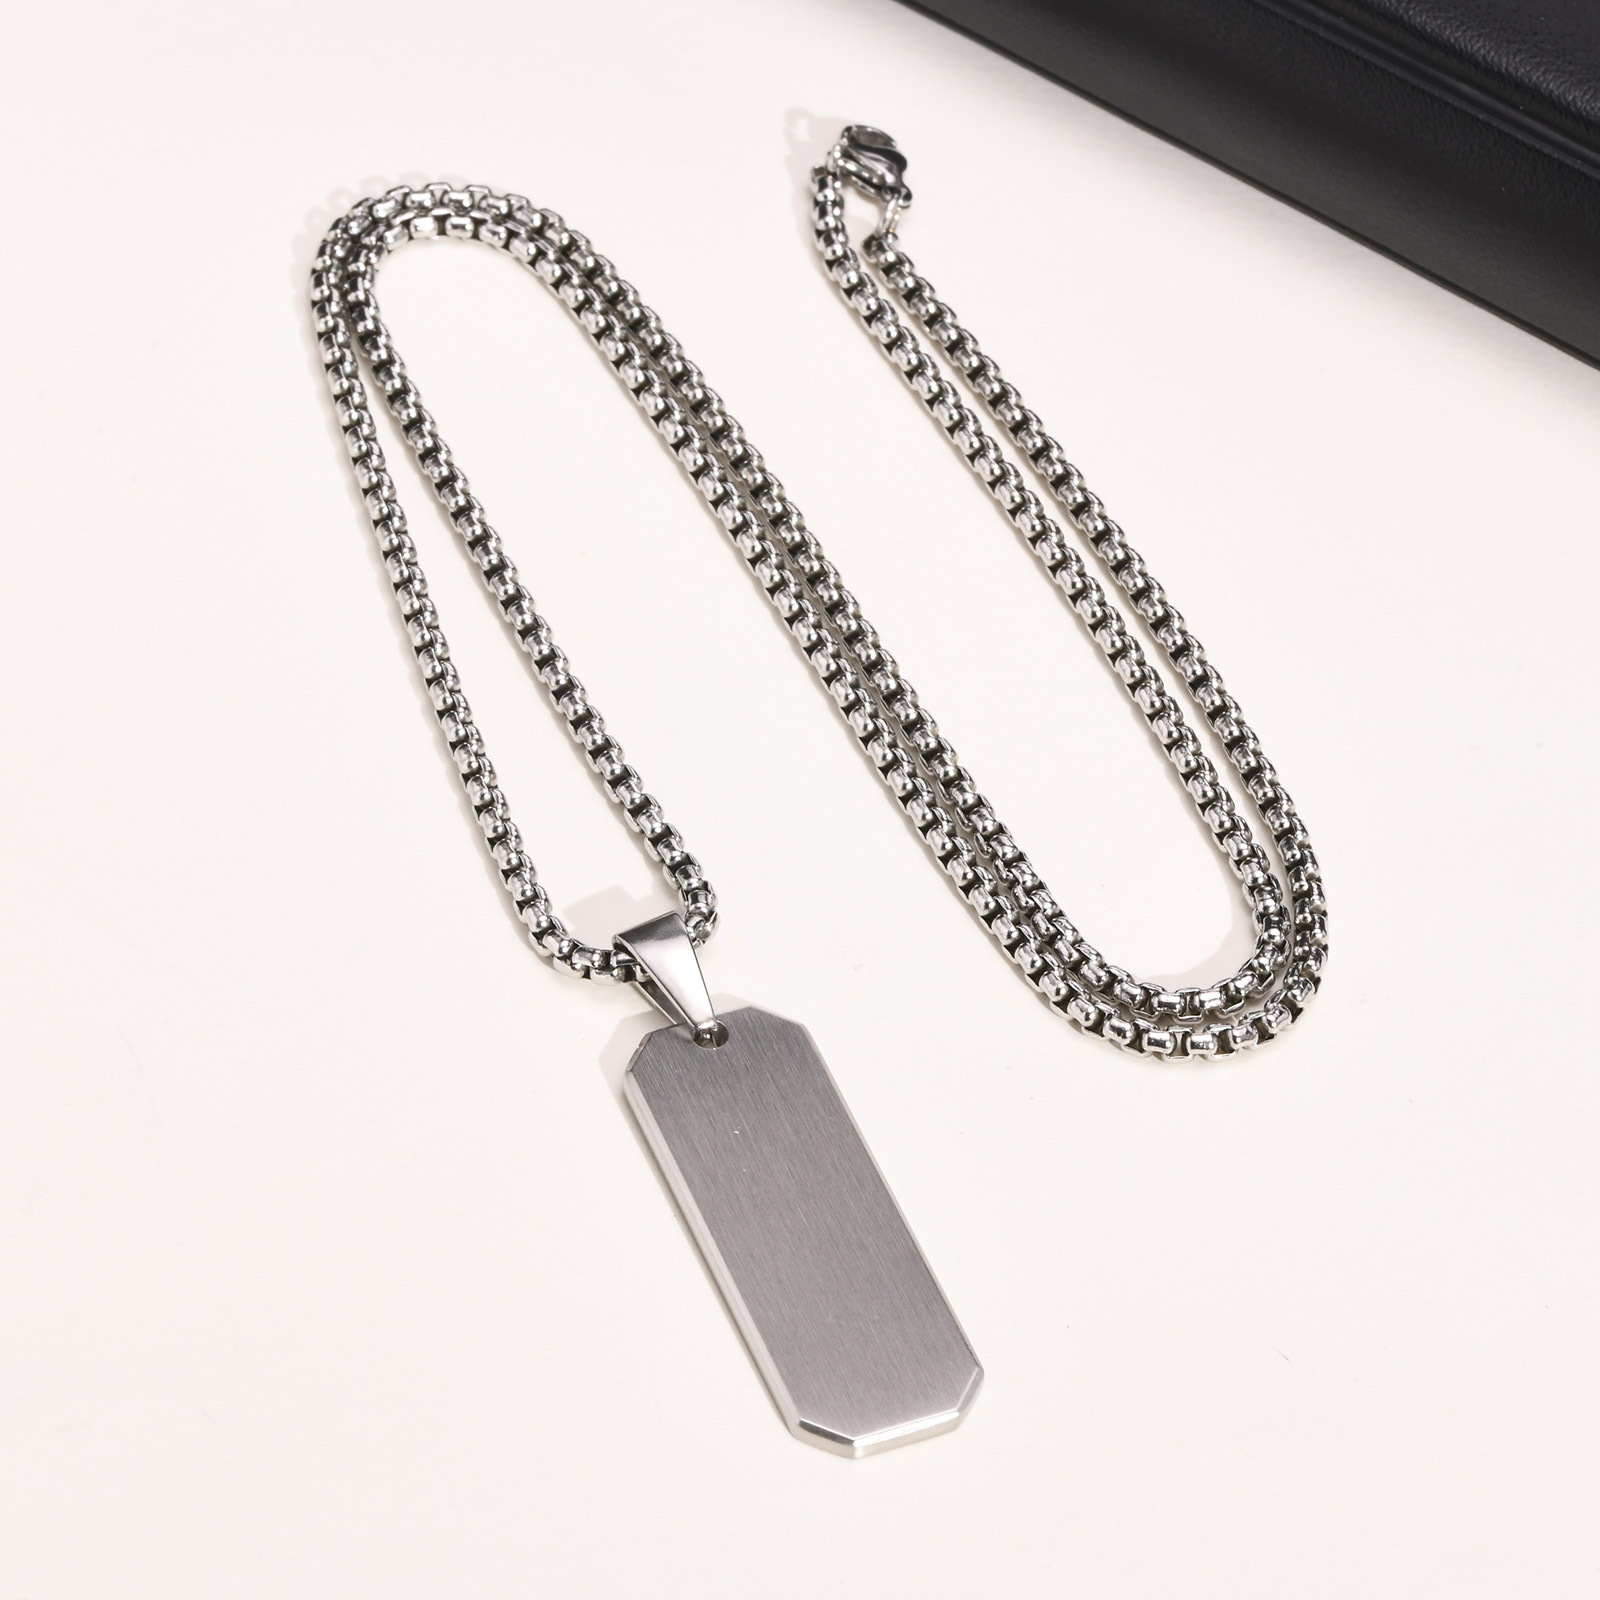 Steel colored pendant with chain